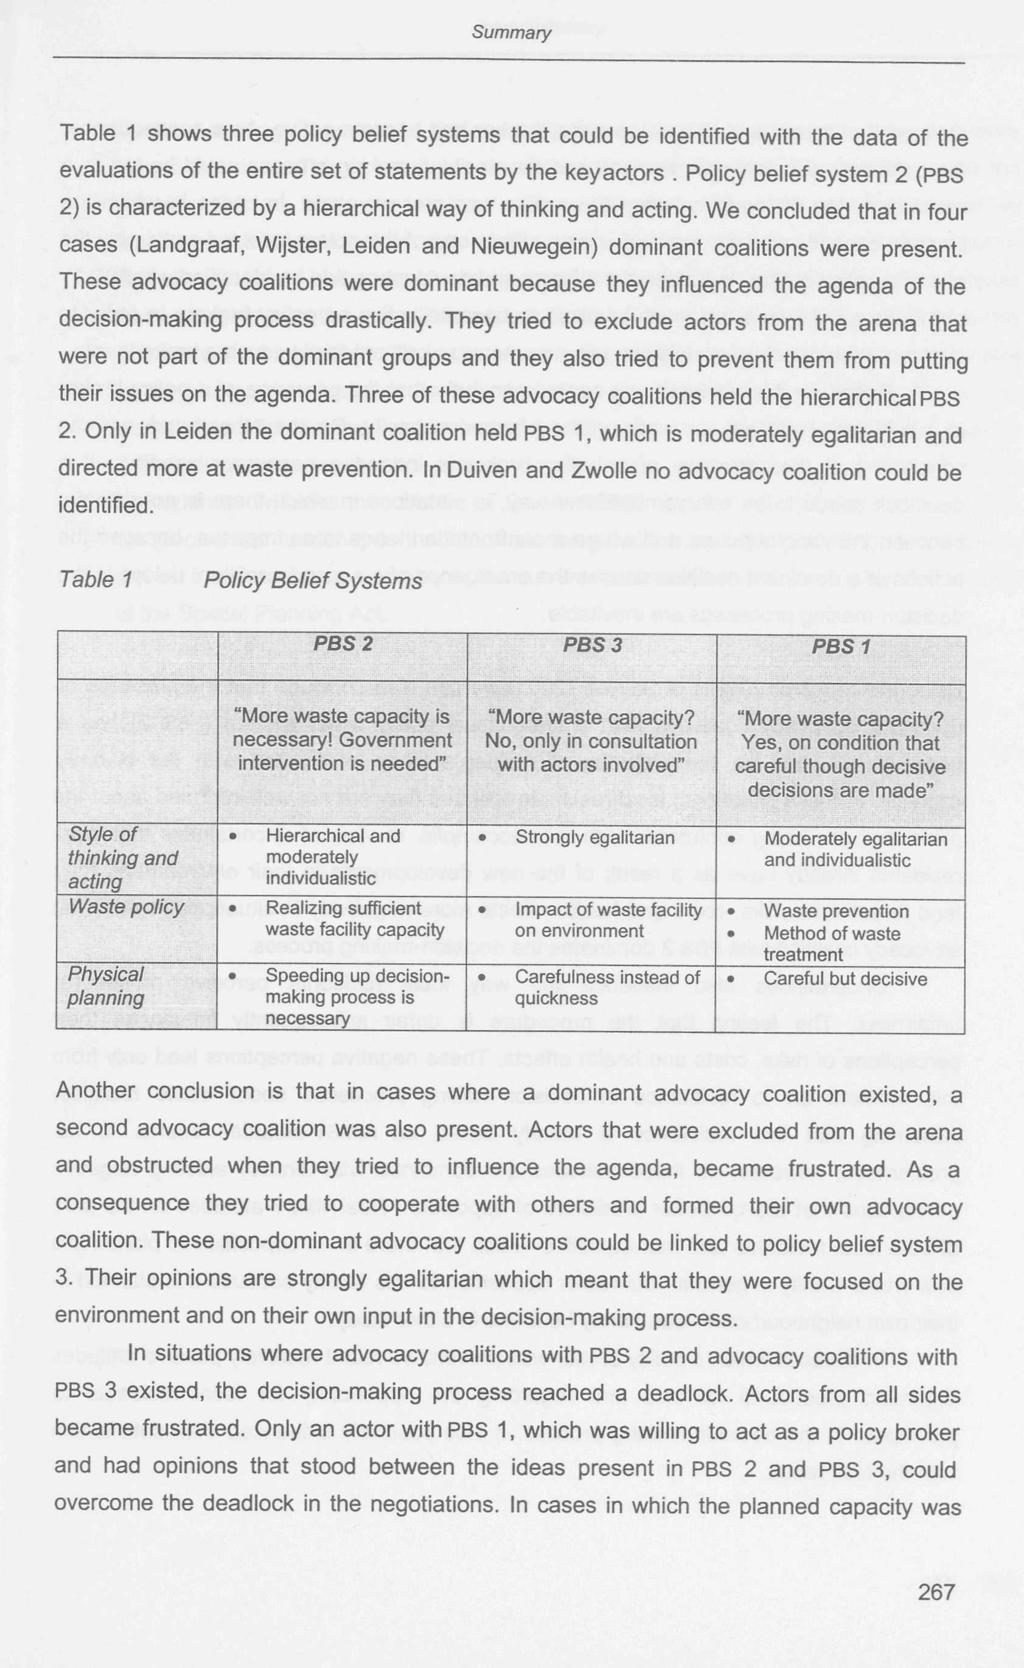 Table 1 shows three policy belief systems that could be identified with the data of the evaluations of the entire set of statements by the keyactors.